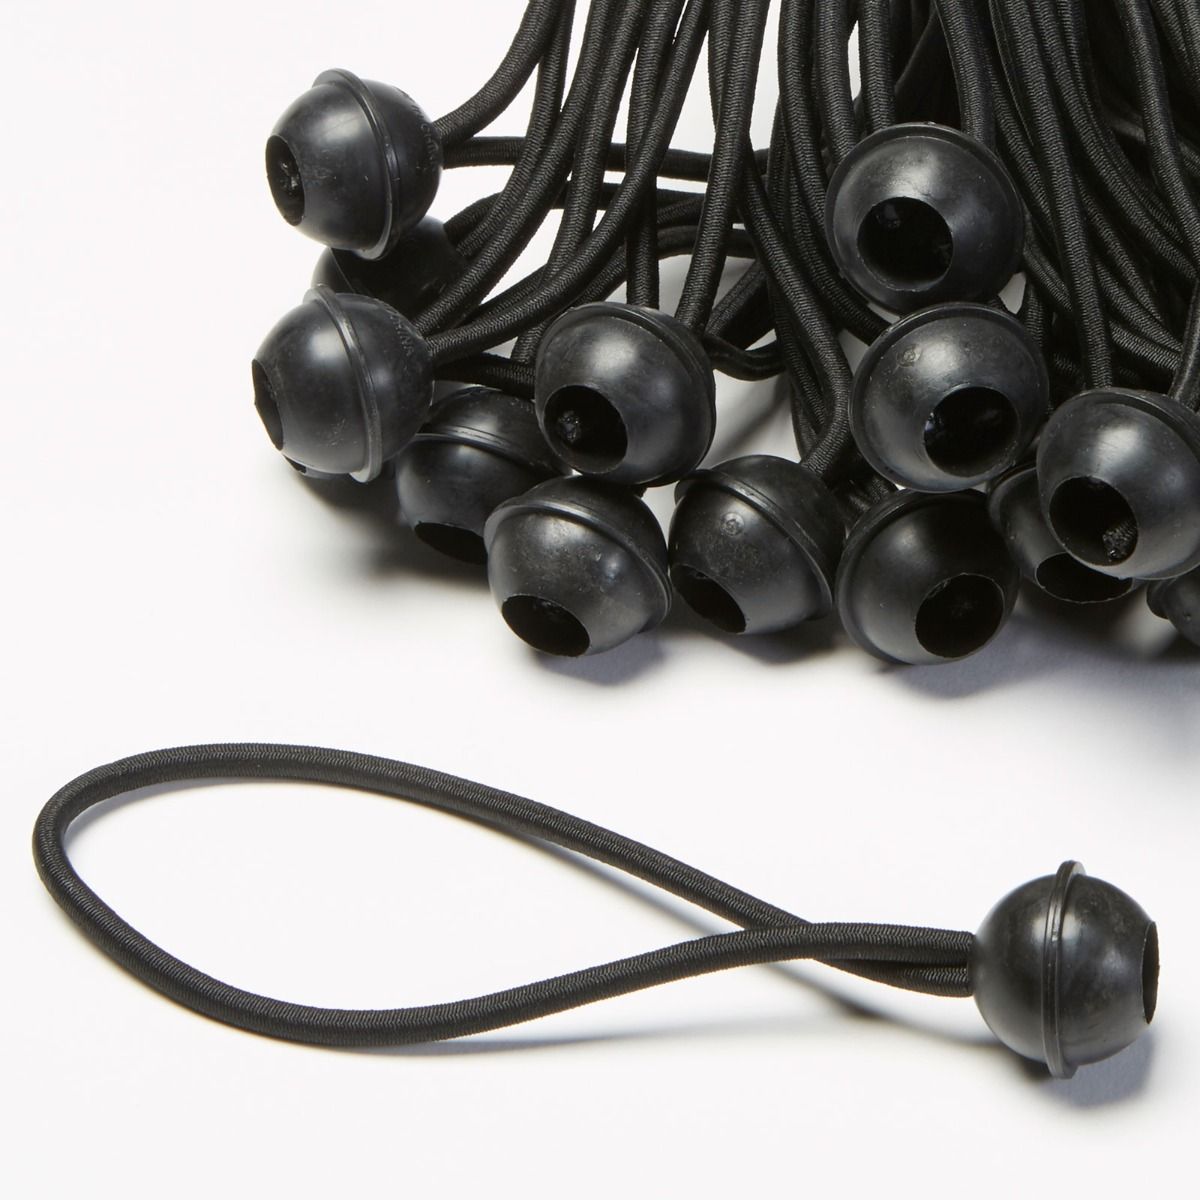 Carl’s Place 6” Black Ball Bungees